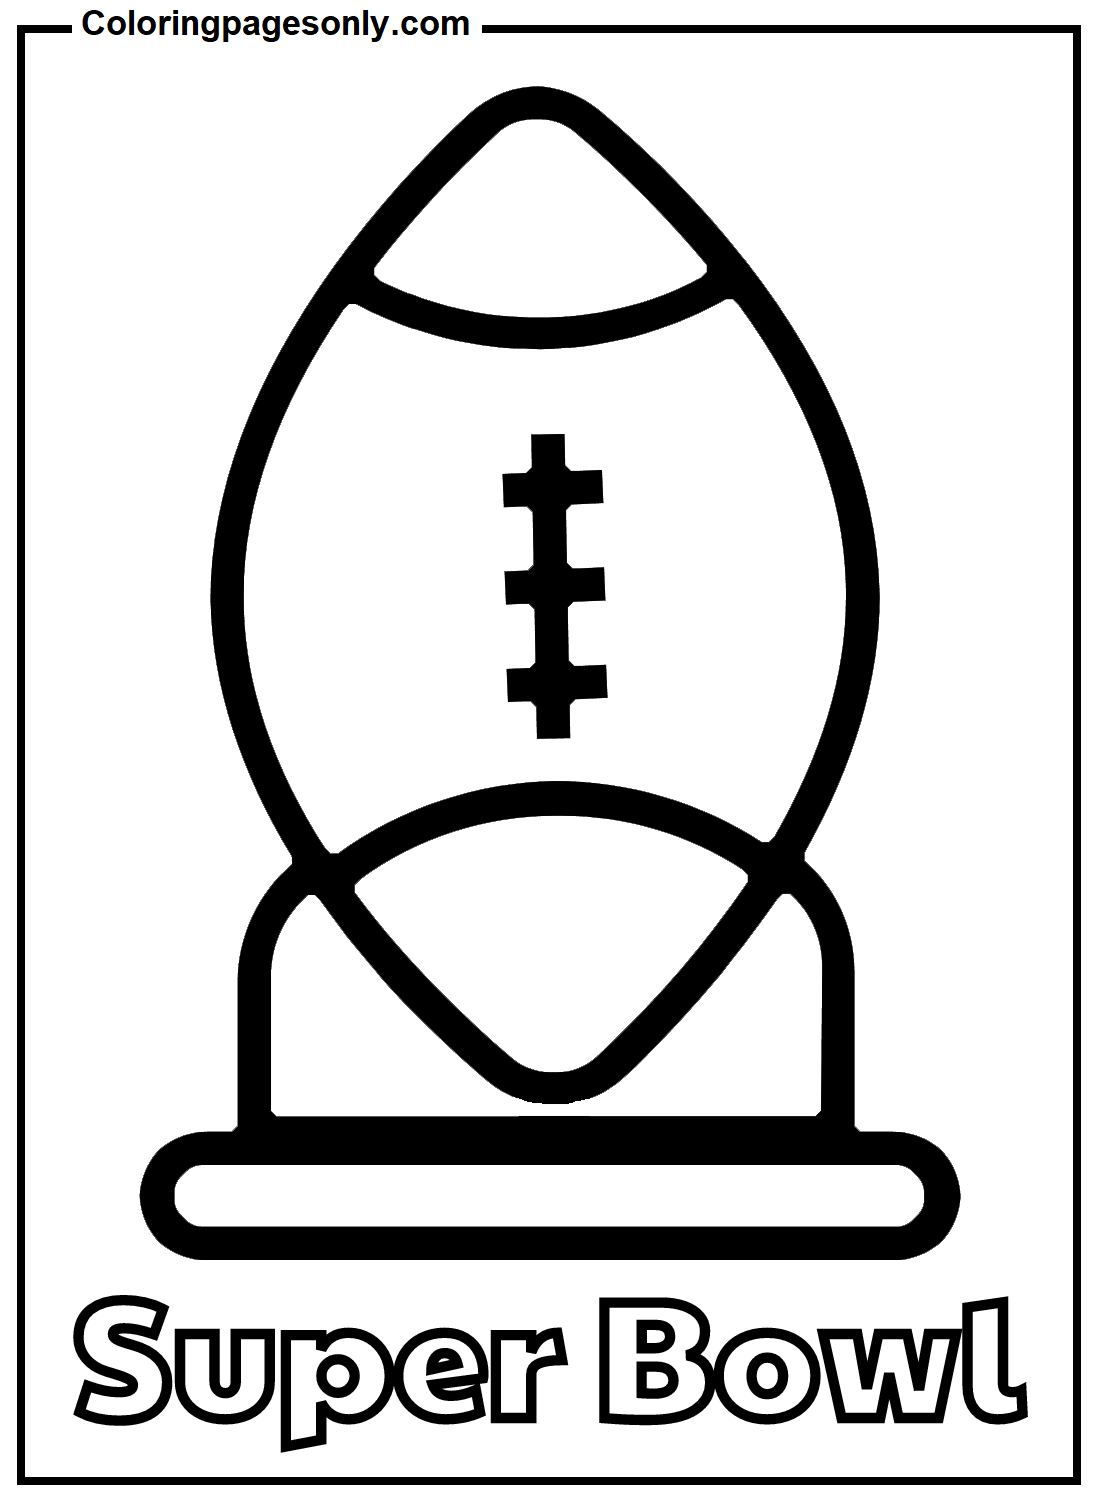 American Football Ball Coloring Page